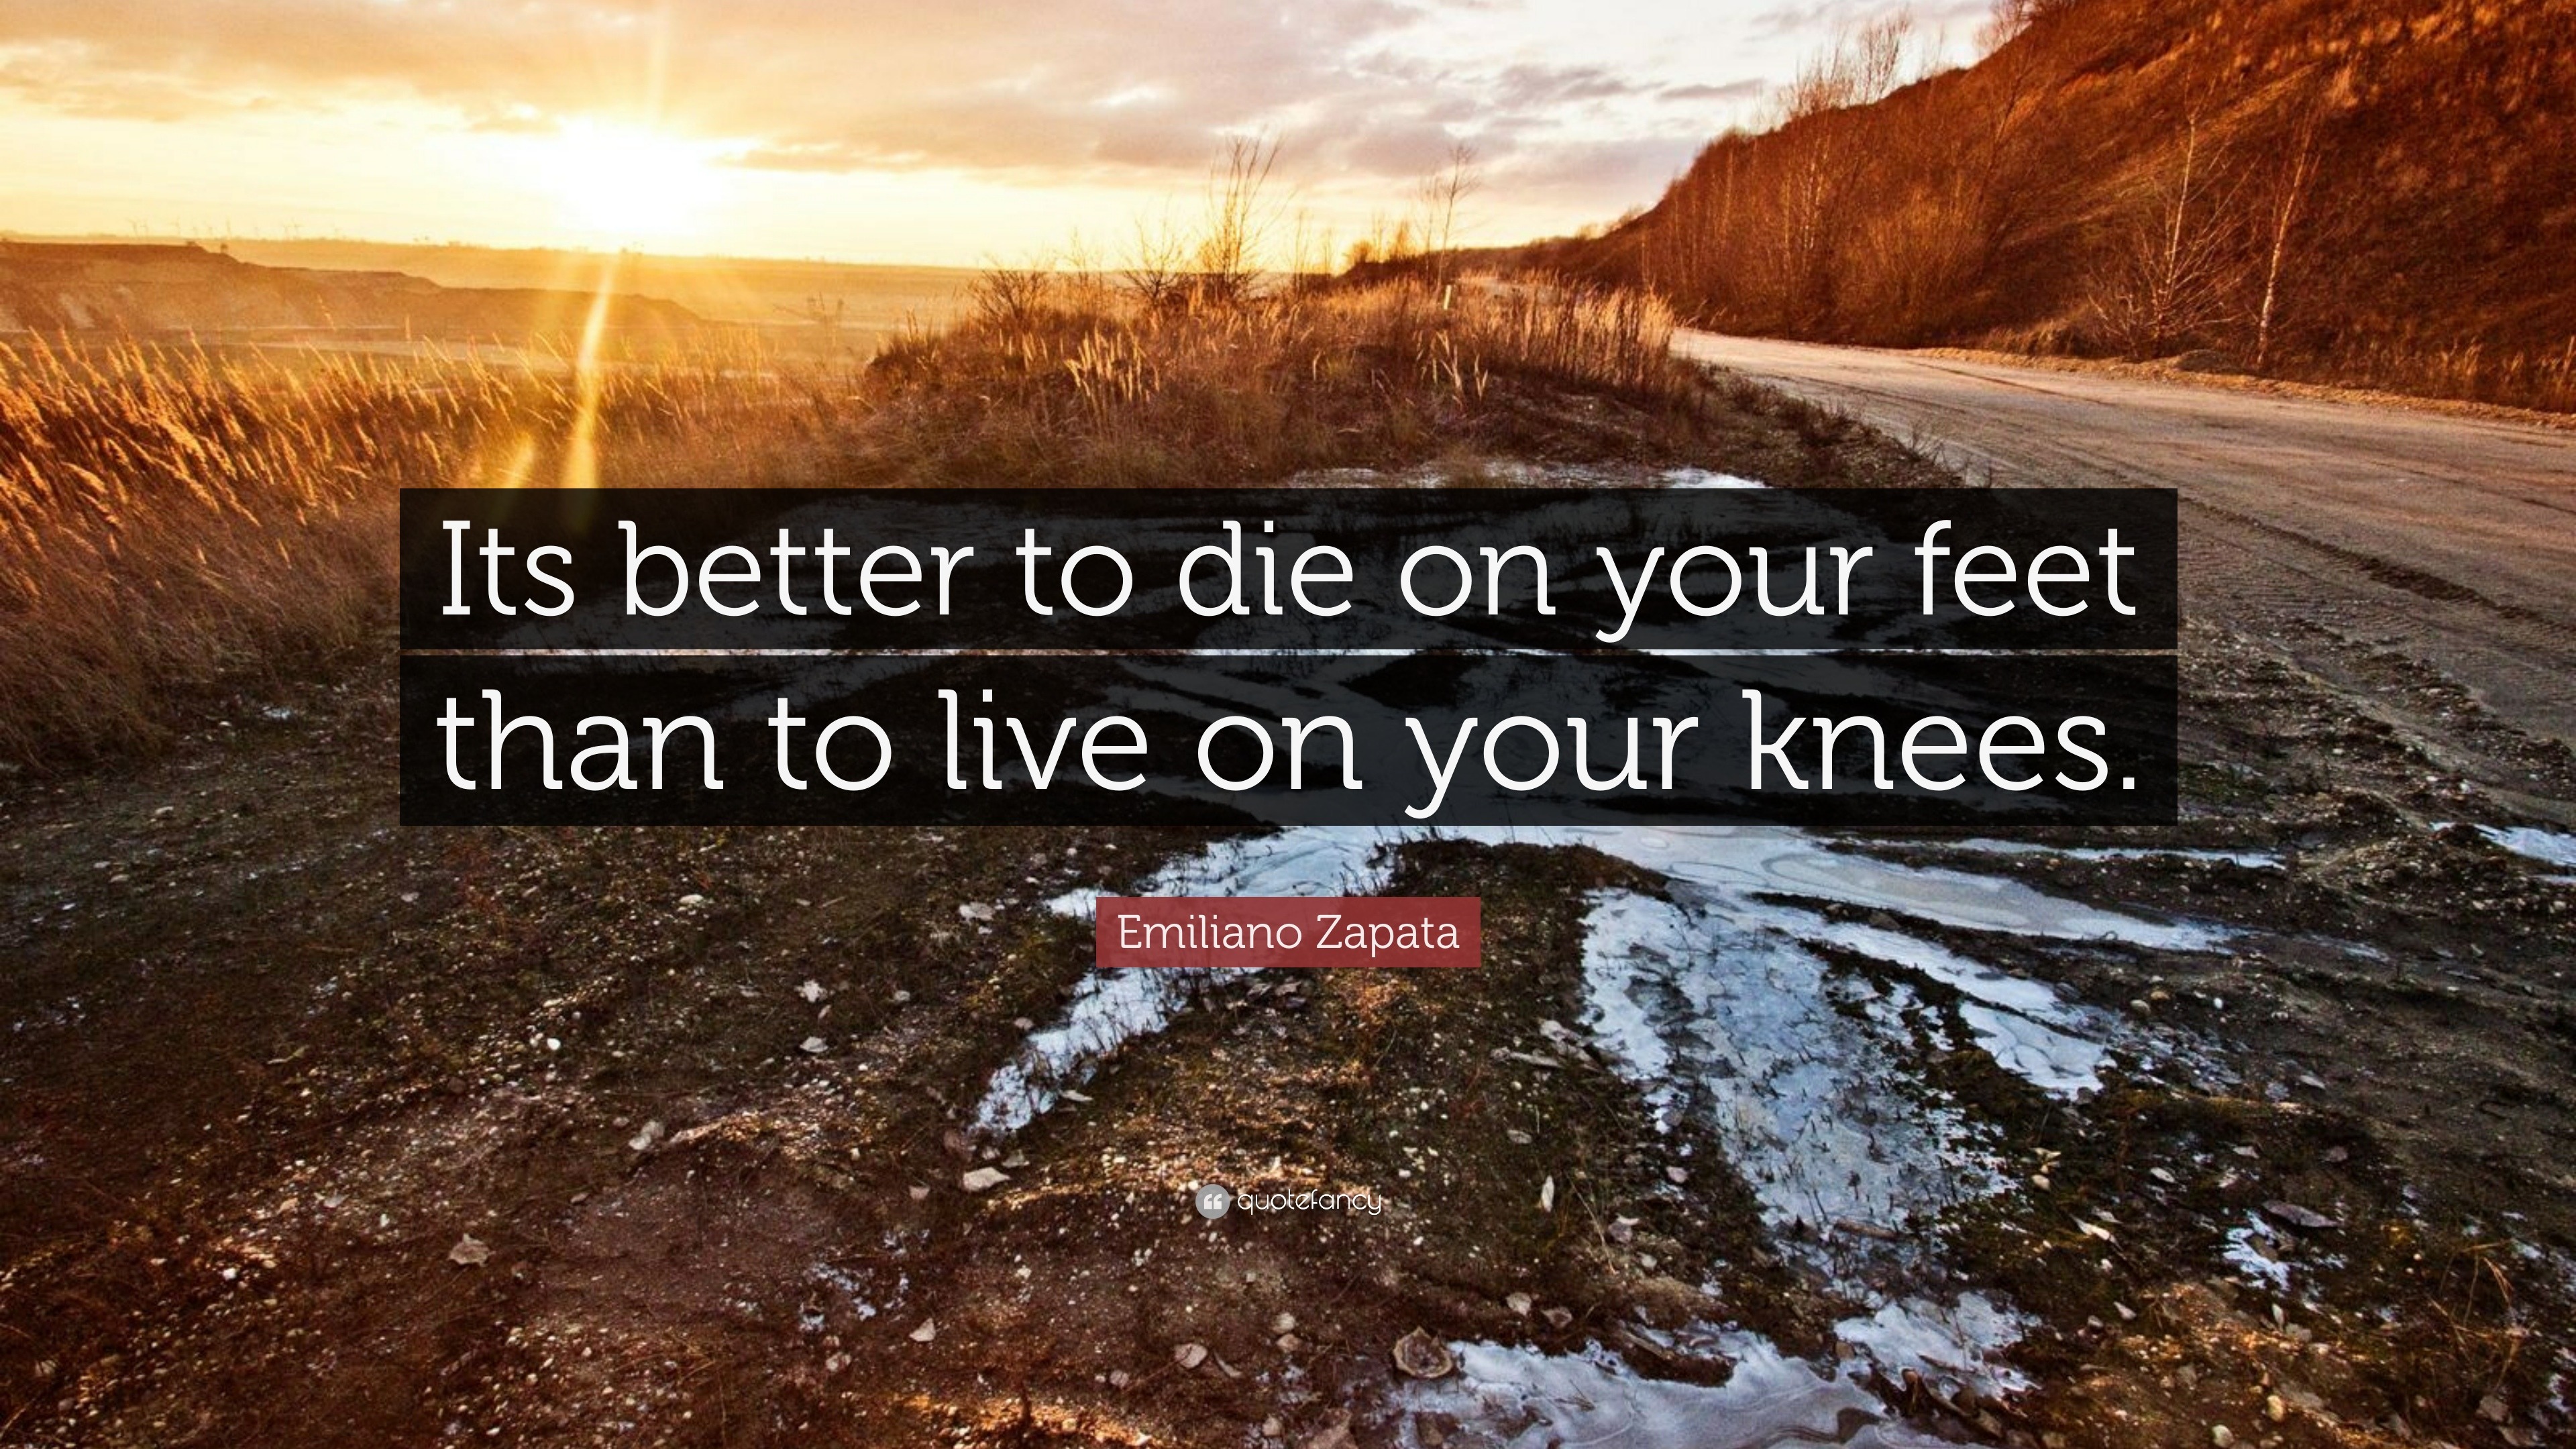 Emiliano Zapata Quote: “Its better to die on your feet than to live on ...